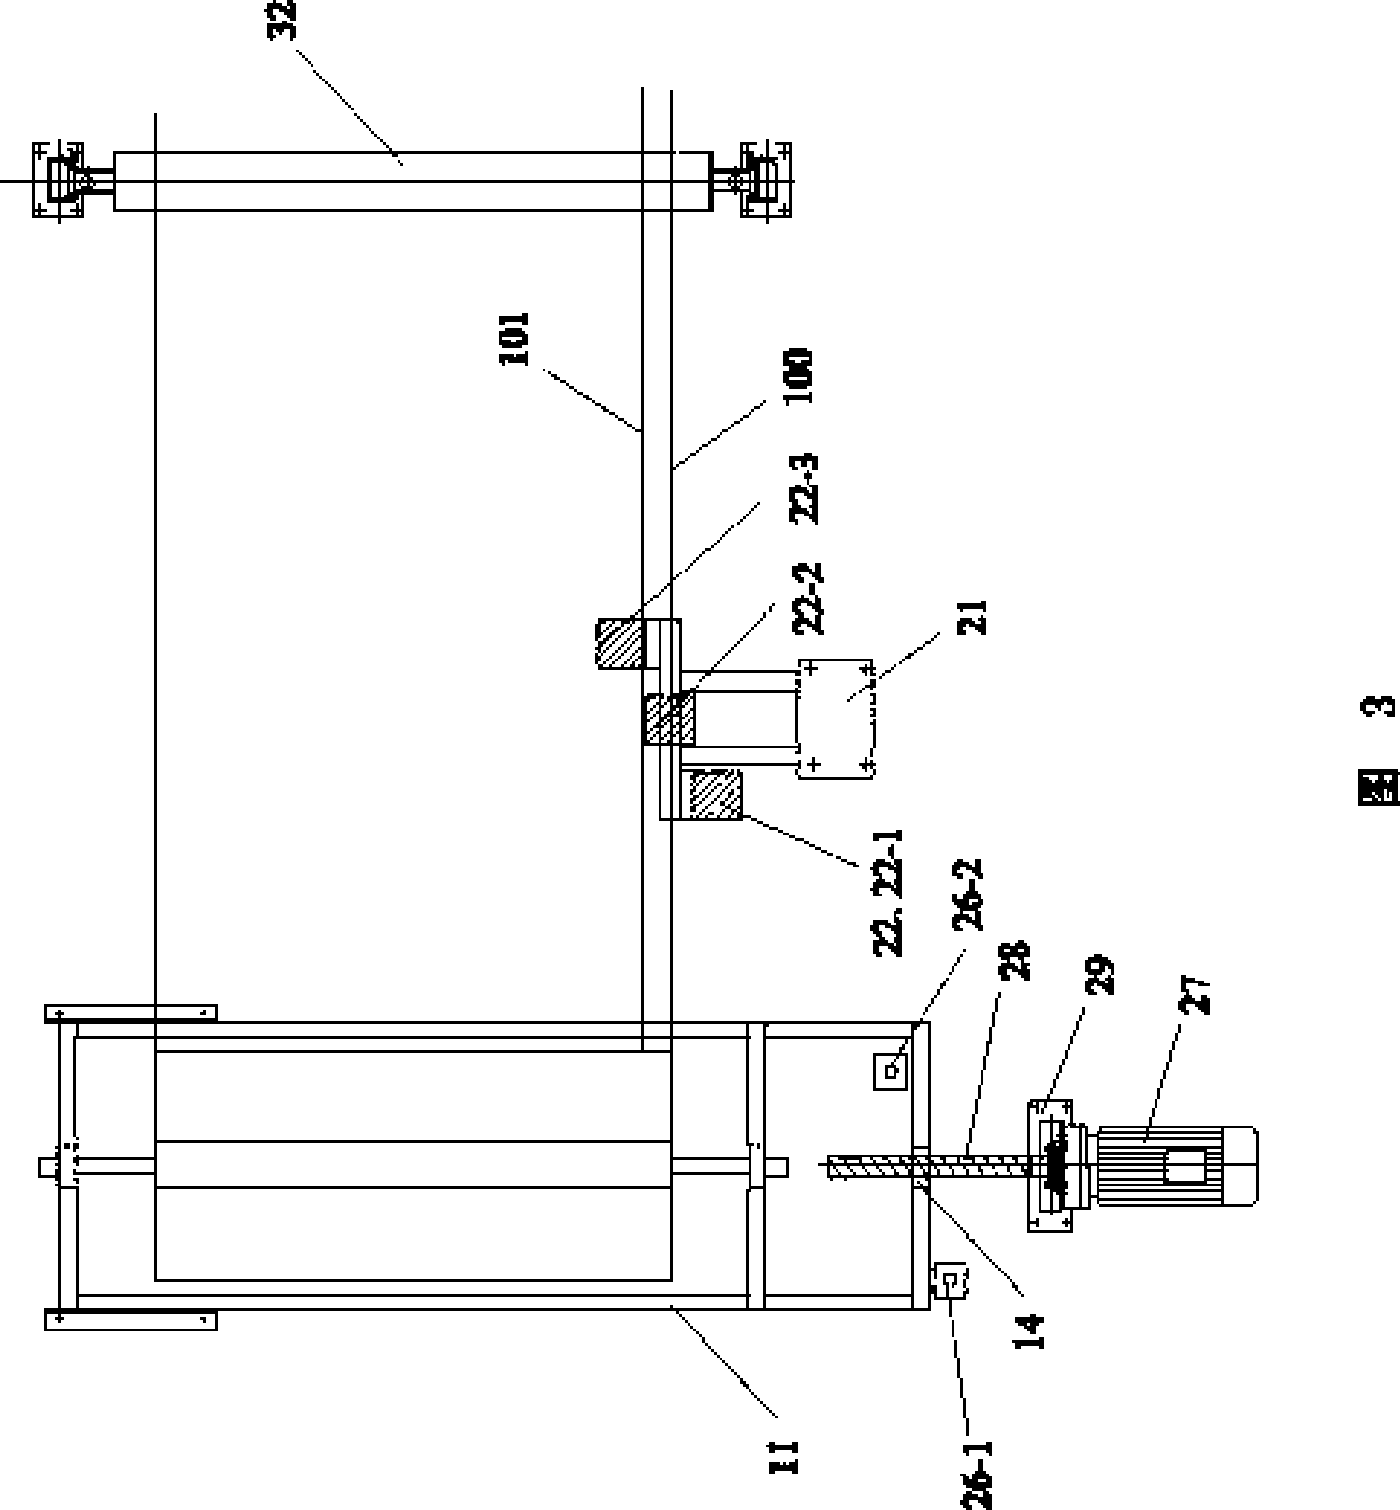 System and method for manufacturing flocking wall hangings